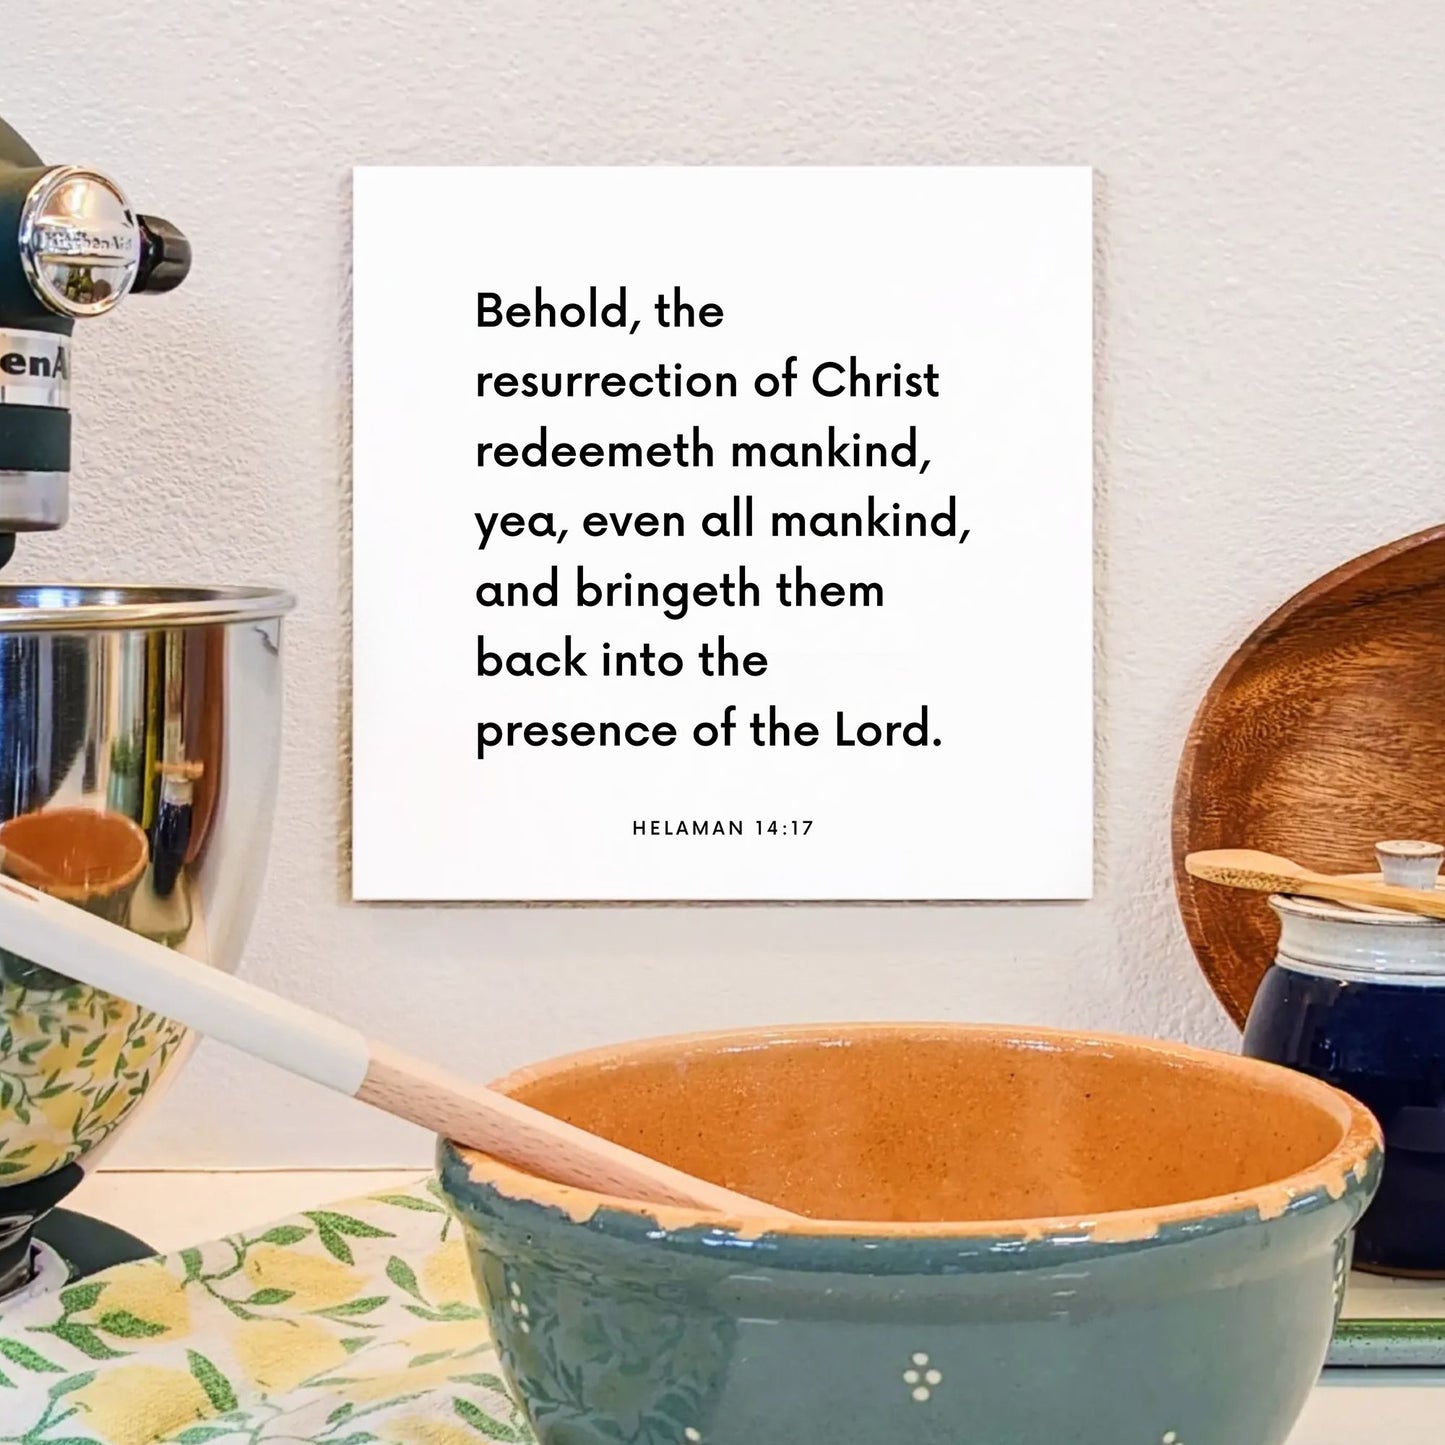 Kitchen mouting of the scripture tile for Helaman 14:17 - "The resurrection of Christ redeemeth mankind"